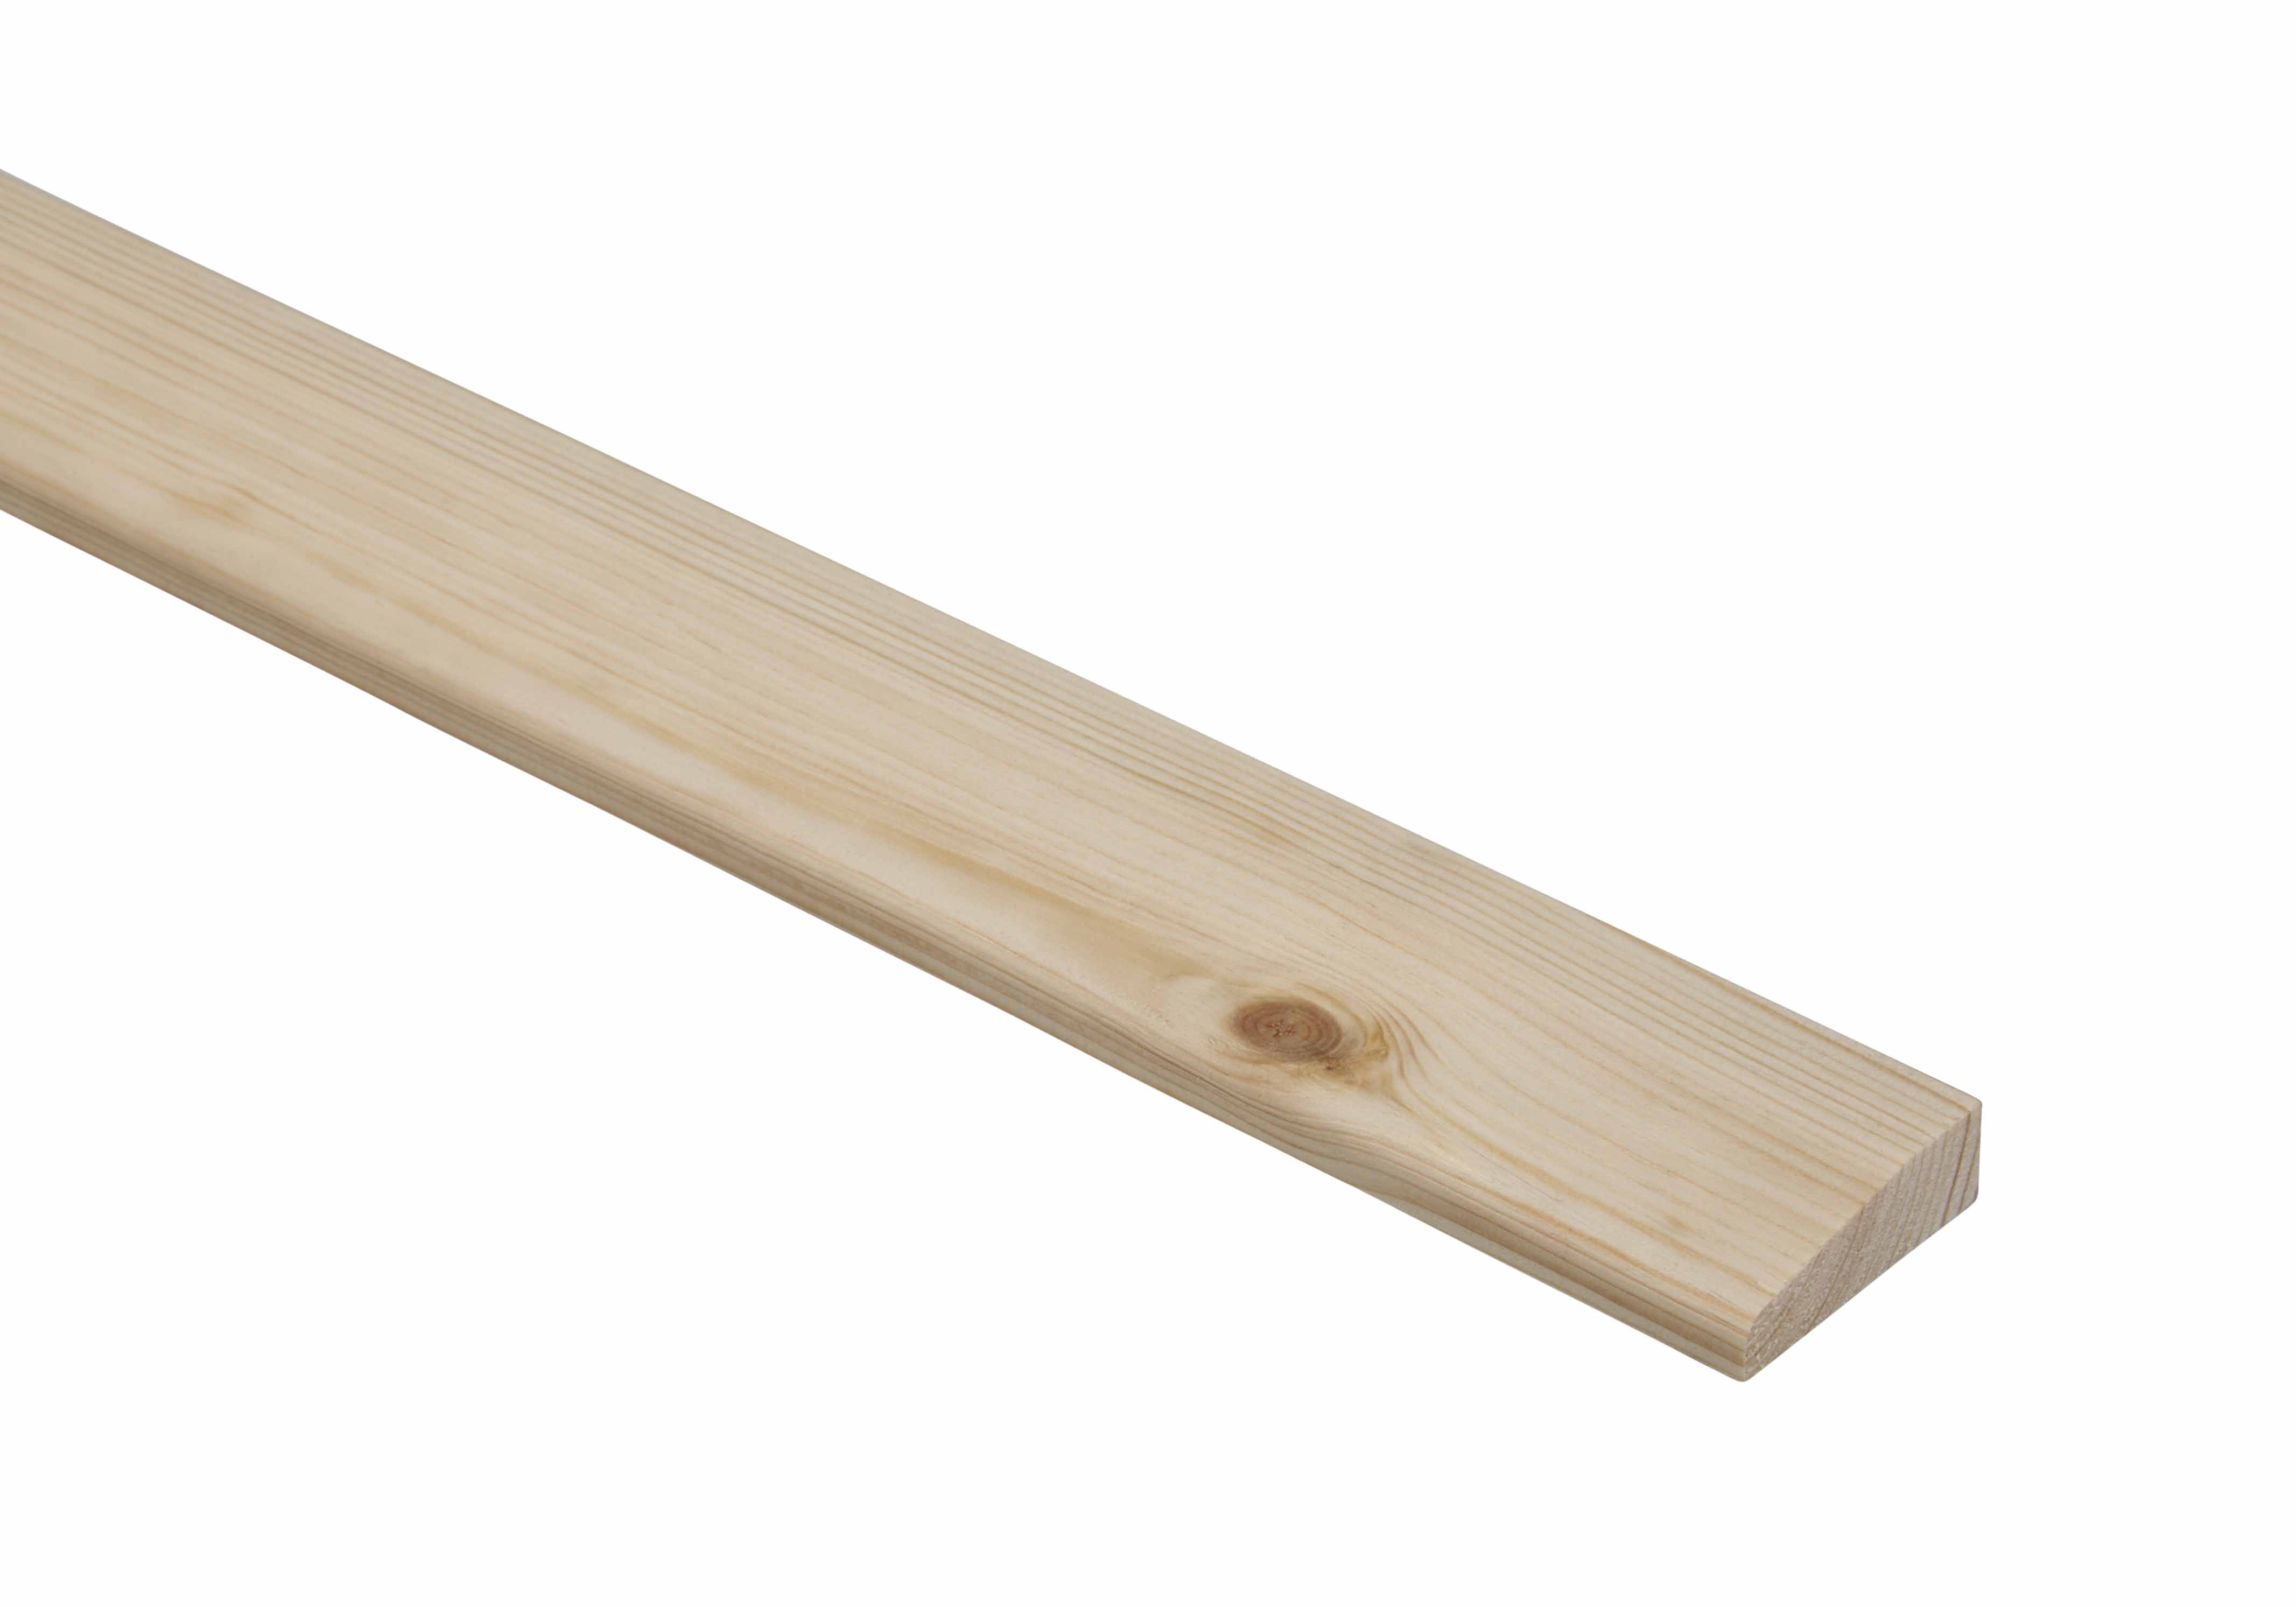 10 Pine Chamfered Architrave Mouldings 15 x 46 x 2100mm